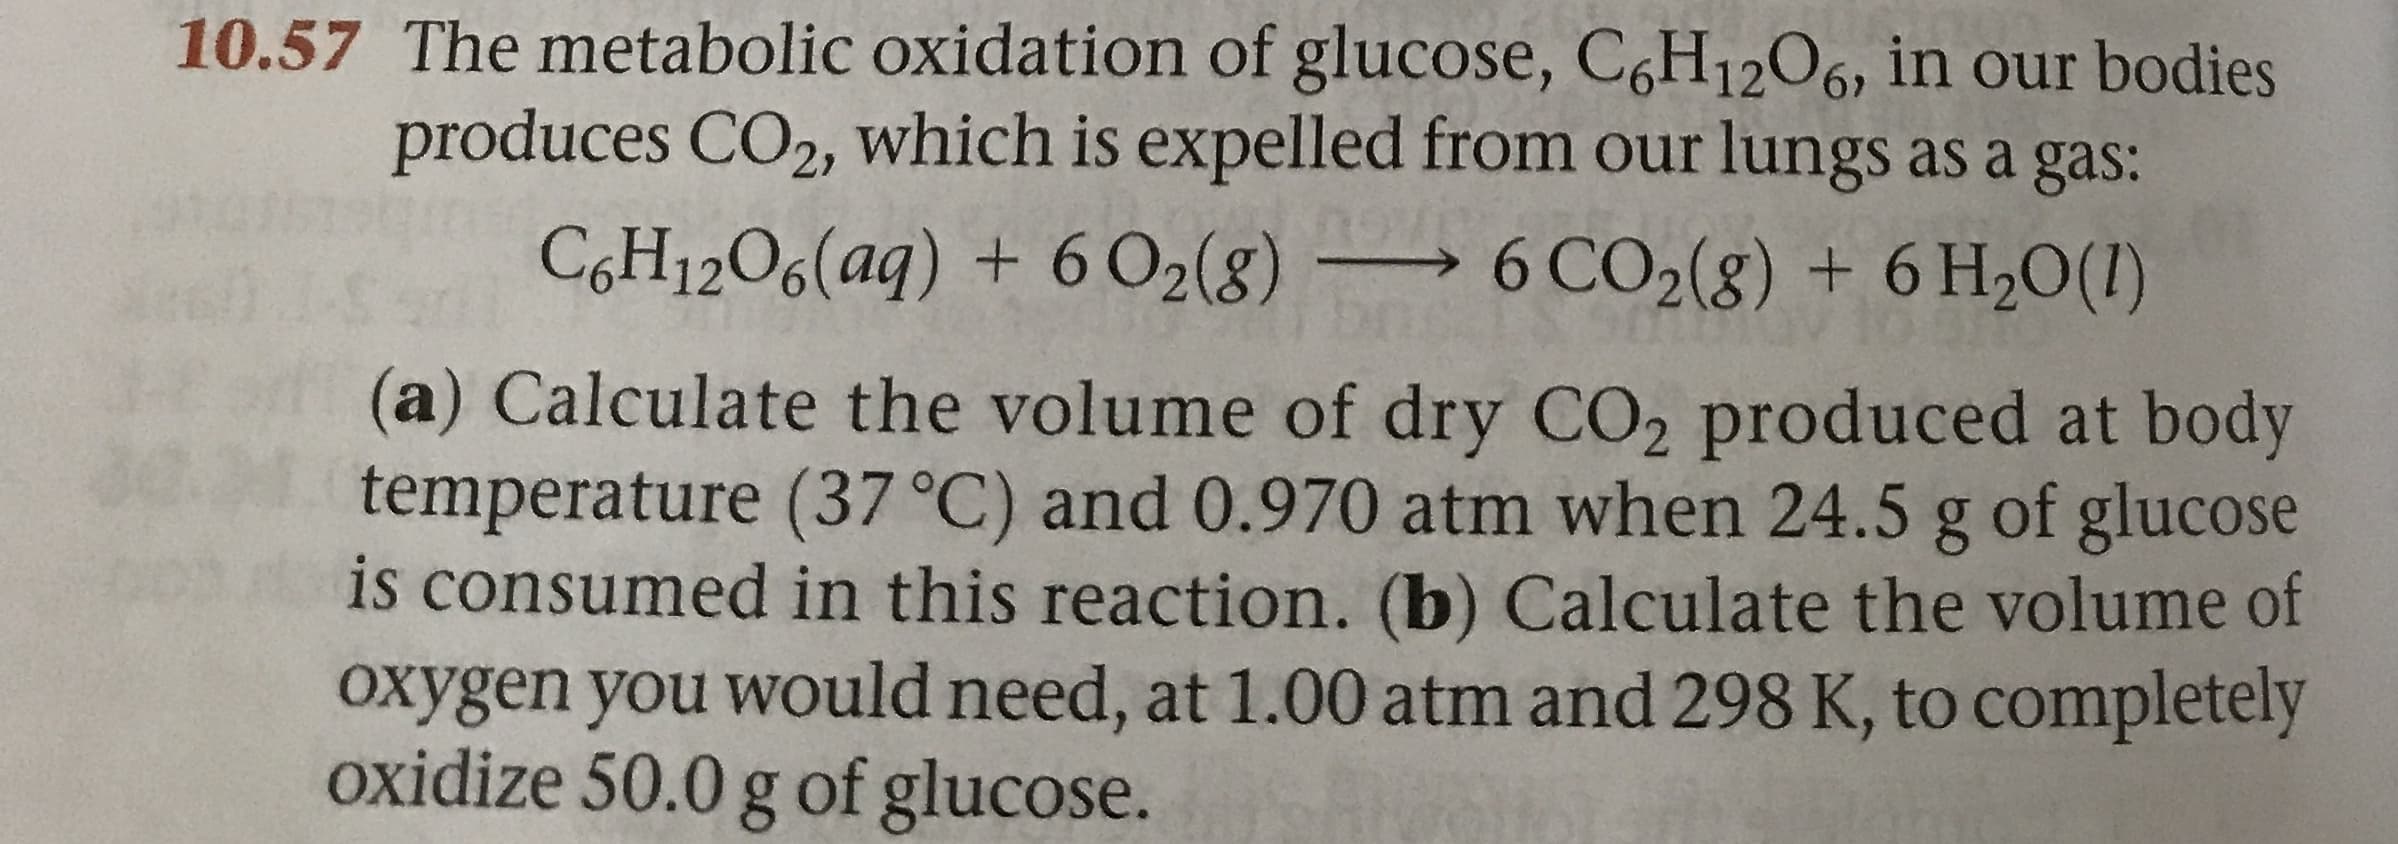 10.57 The metabolic oxidation of glucose, C6H1206, in our bodies
produces CO2, which is expelled from our lungs as a gas:
COH12O6(aq) + 6 O2(g) 6 CO2(g) + 6 H20(1)
(a) Calculate the volume of dry CO2 produced at body
temperature (37 °C) and 0.970 atm when 24.5 g of glucose
is consumed in this reaction. (b) Calculate the volume of
Oxygen you would need, at 1.00 atm and 298 K, to completely
oxidize 50.0 g of glucose.
